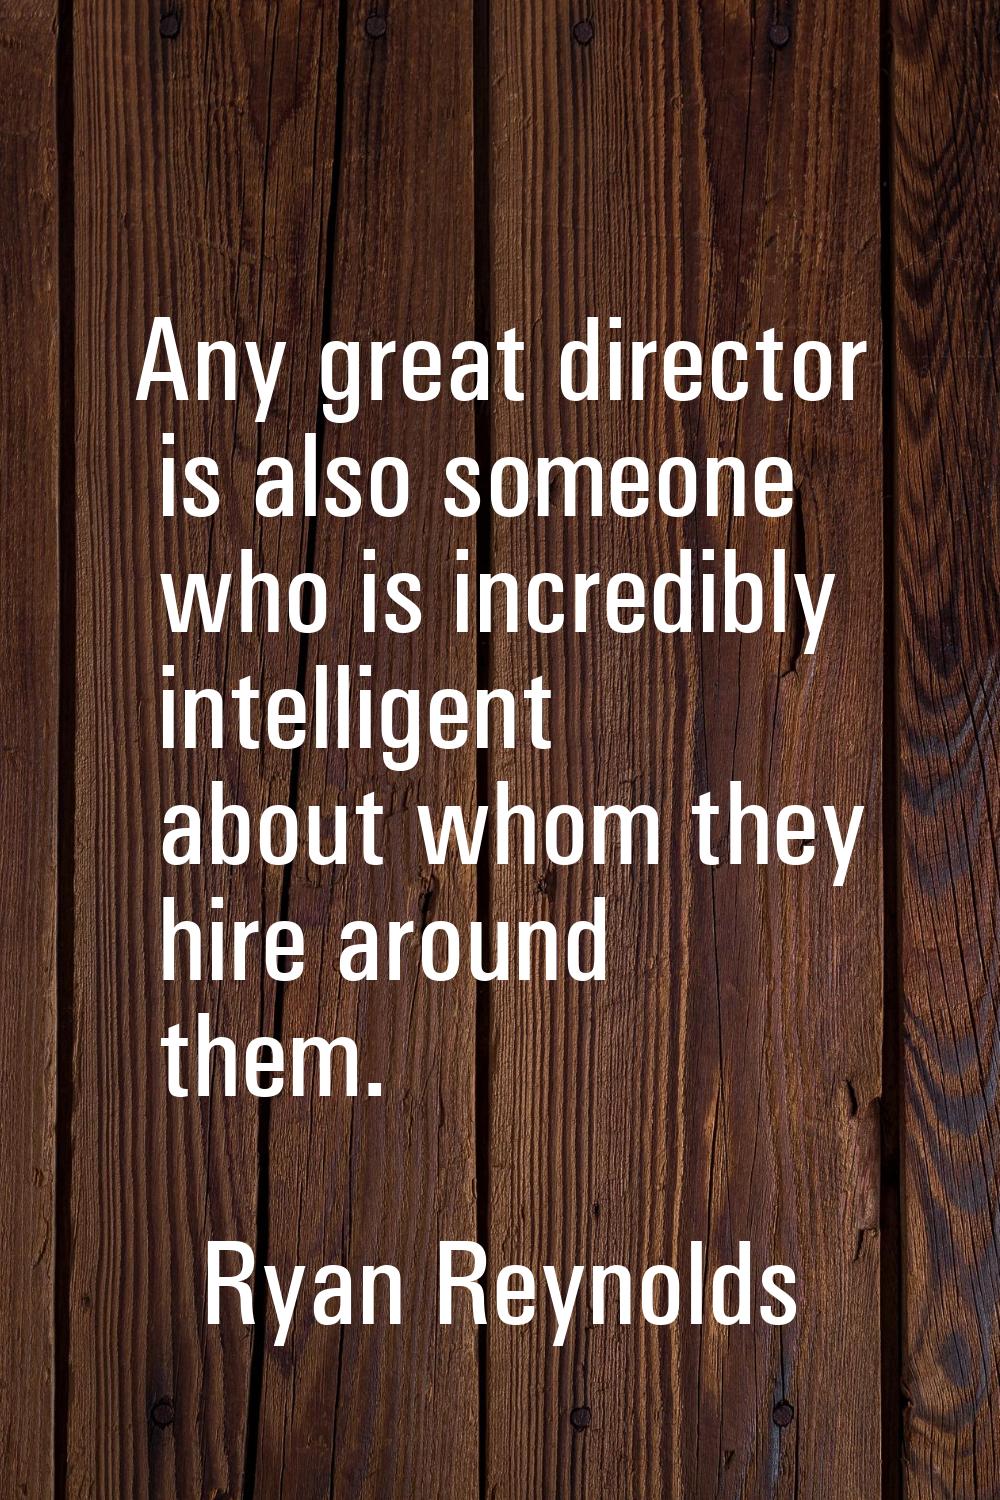 Any great director is also someone who is incredibly intelligent about whom they hire around them.